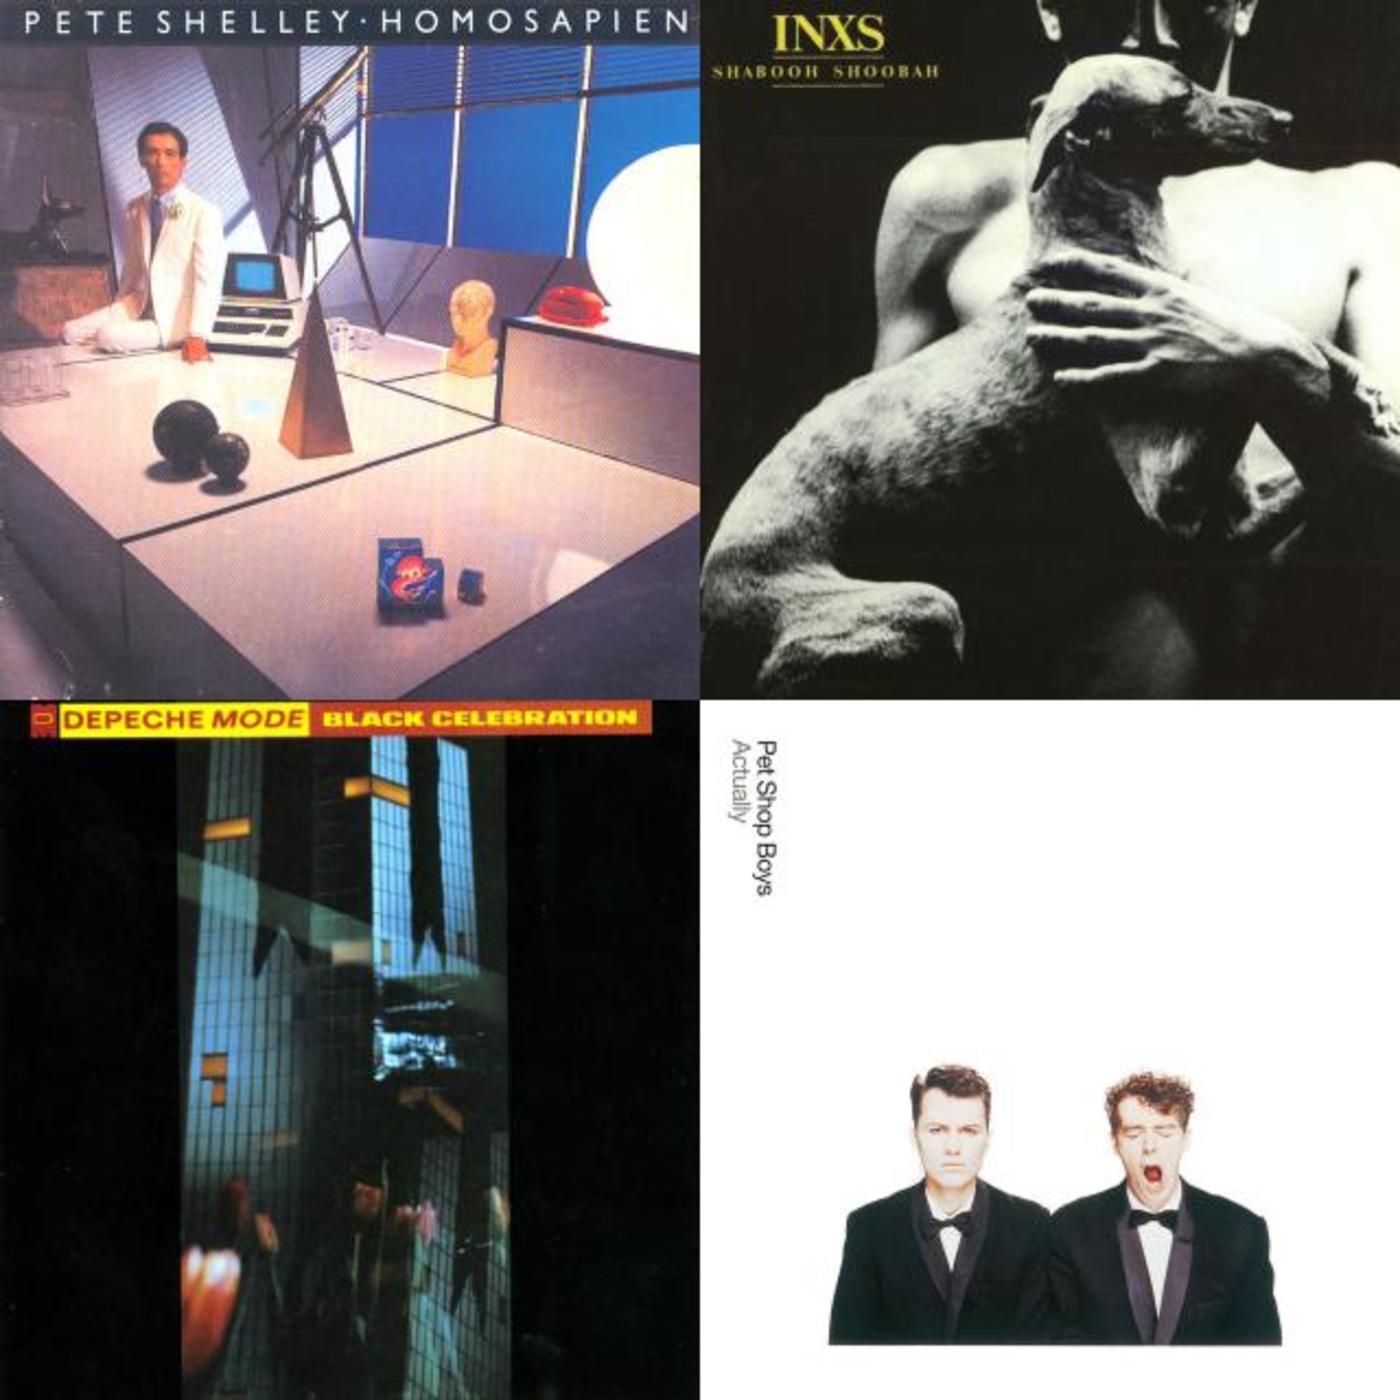 The Long Walk: A Brooding 80s Mix - INXS, Depeche Mode, Pete Shelley, Pet Shop Boys, The Psychedelic Furs, The Boomtown Rats, New Order